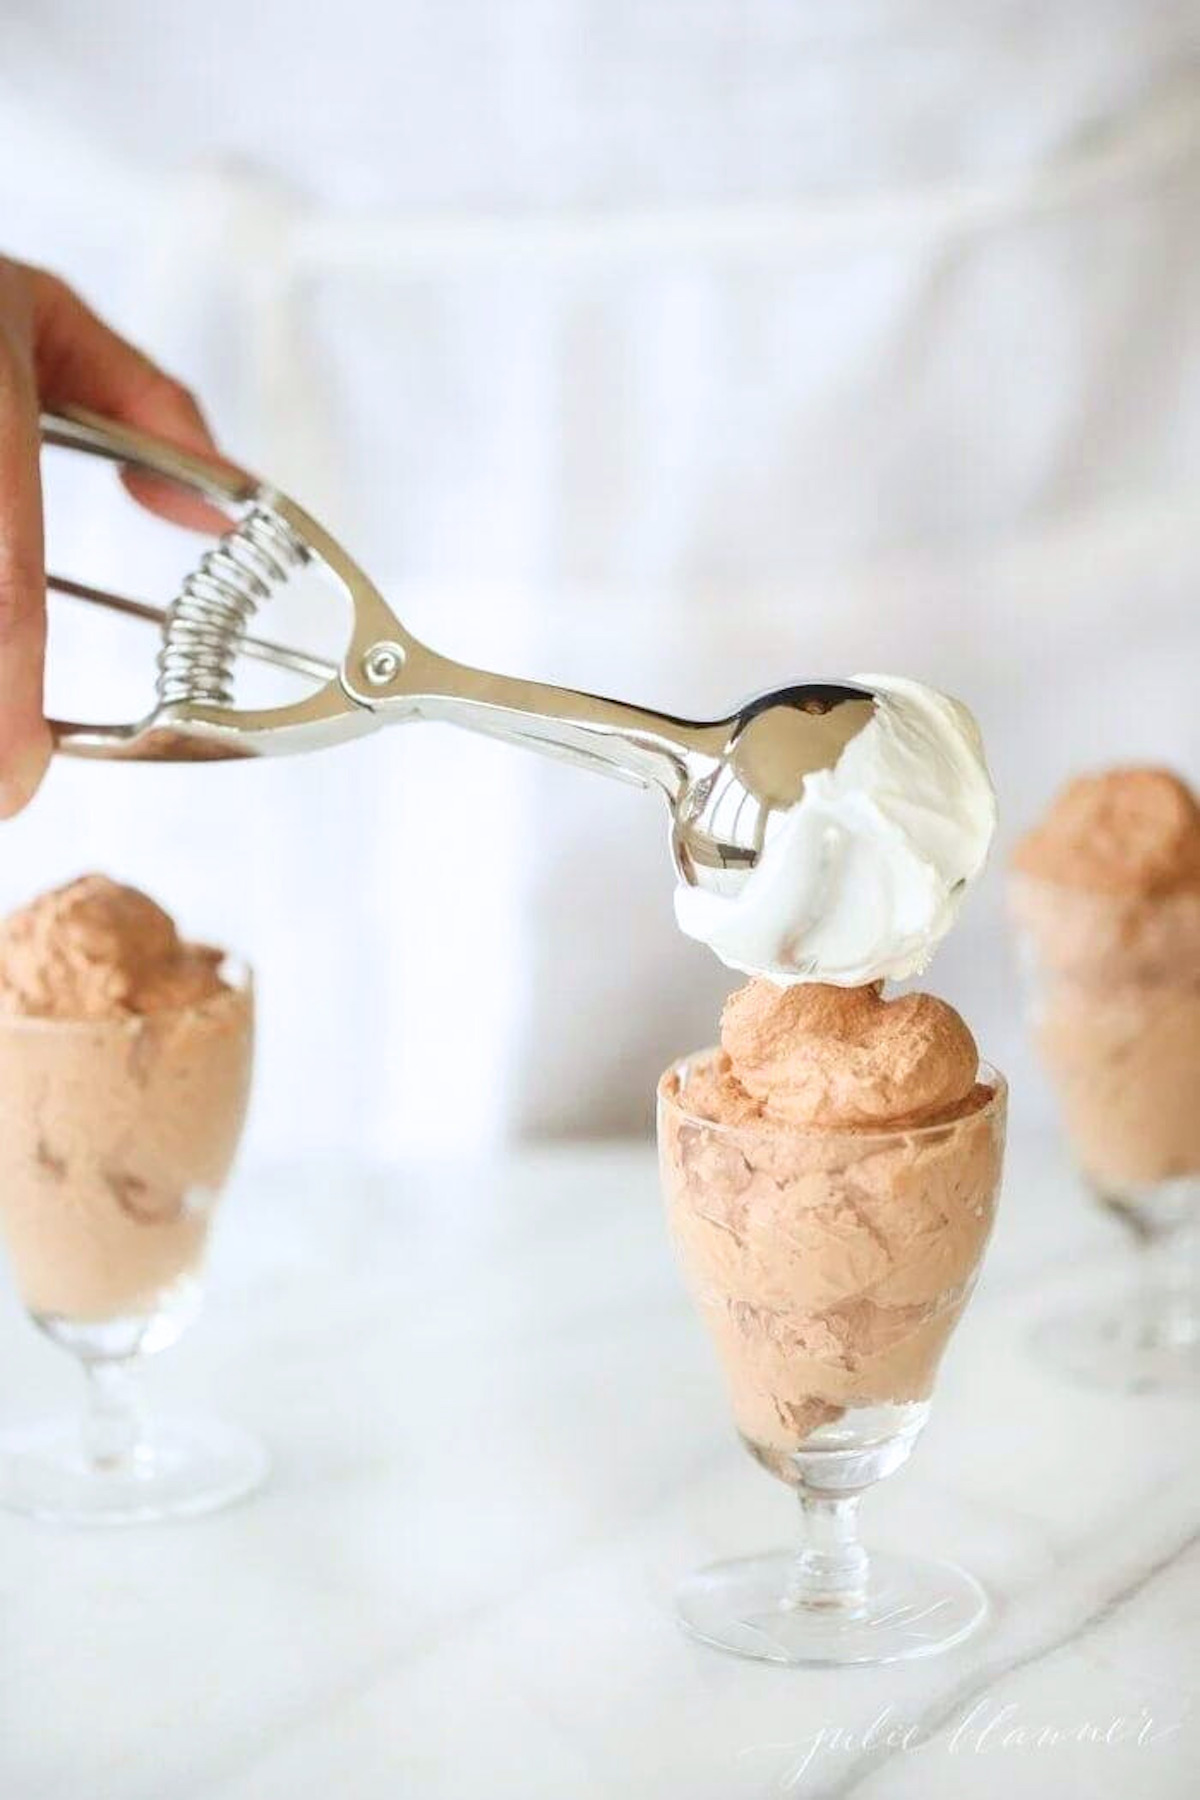 A person expertly scooping chocolate ice cream into small cups, making it the perfect easy chocolate mousse recipe.